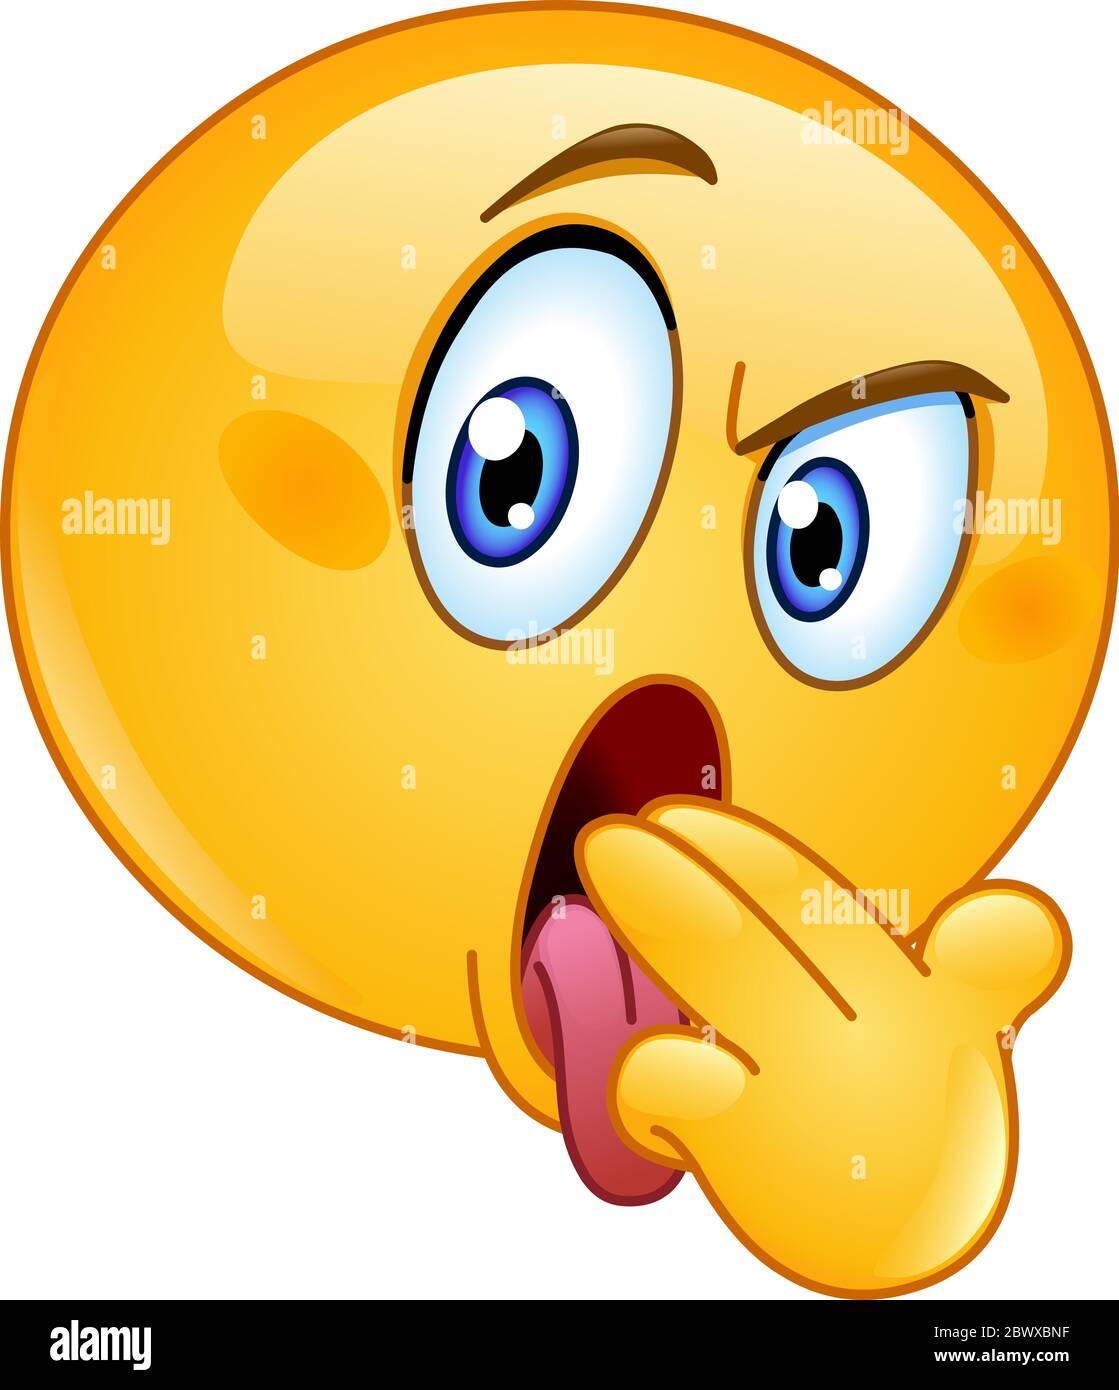 Disgusted emoticon doing a vomit gesture by potting two fingers in mouth Stock Vector